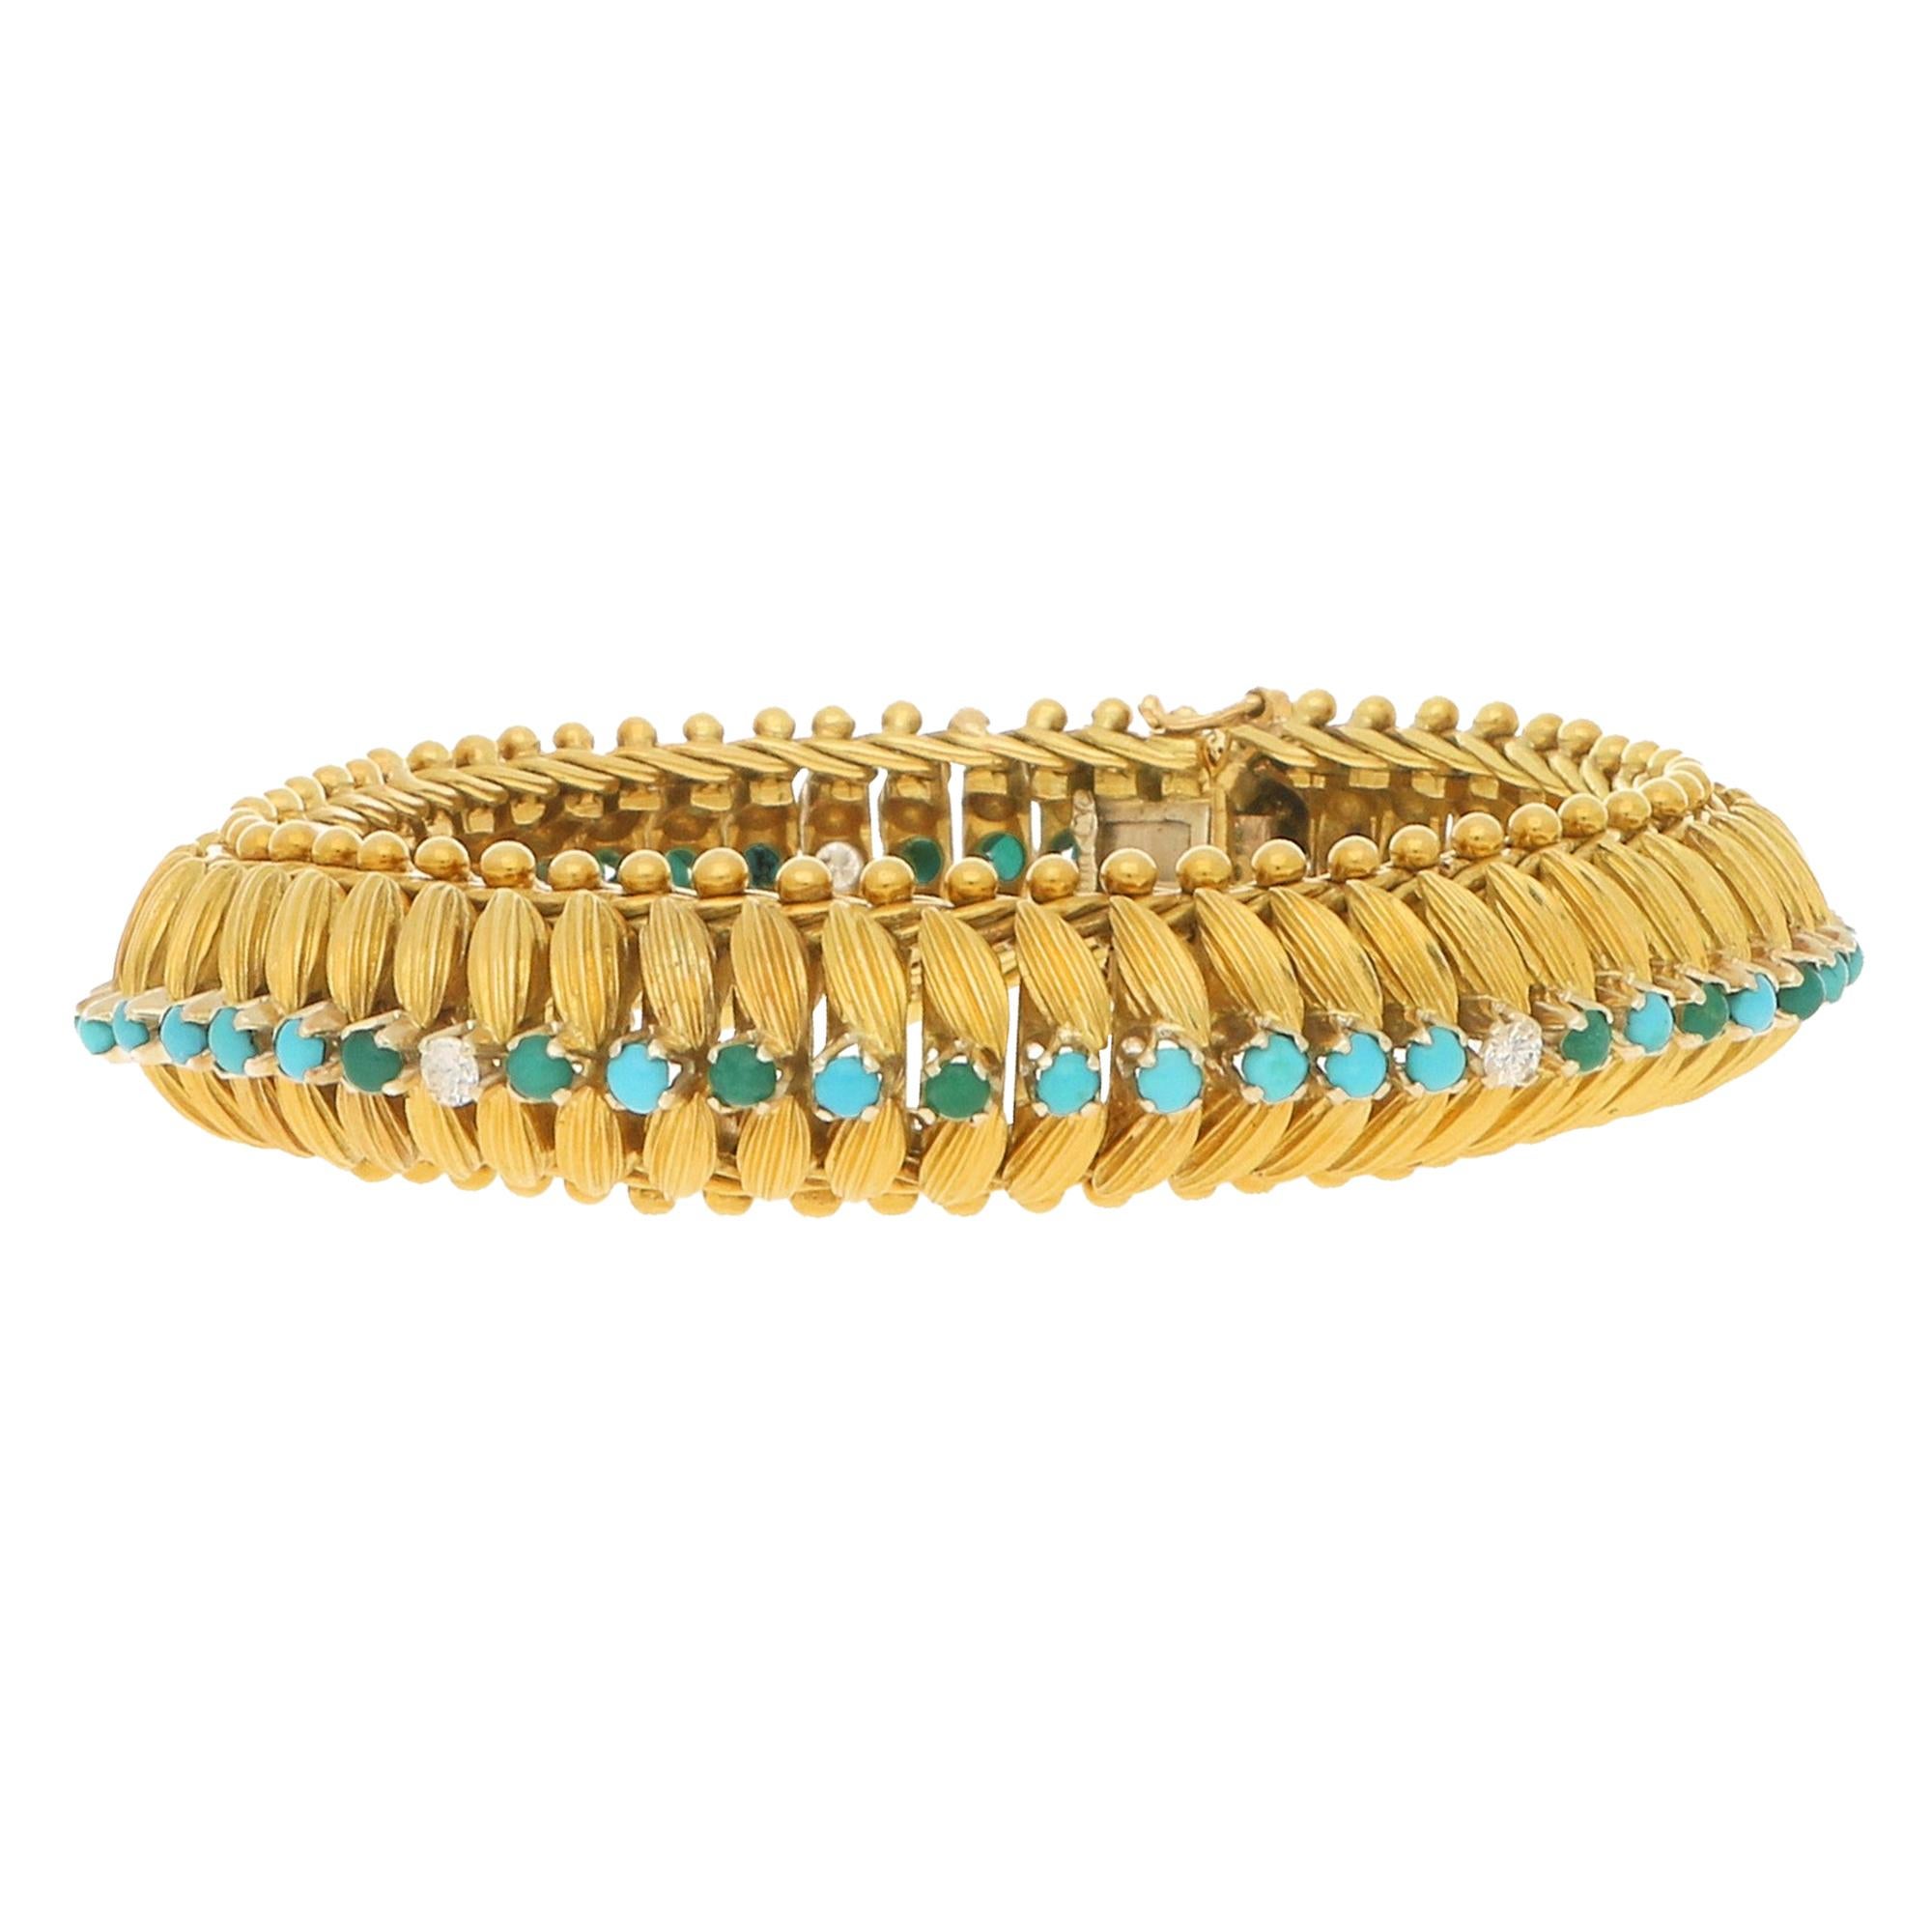 Vintage 1960s Turquoise and Diamond Bracelet in 18 Carat Yellow Gold 0.30 Carat